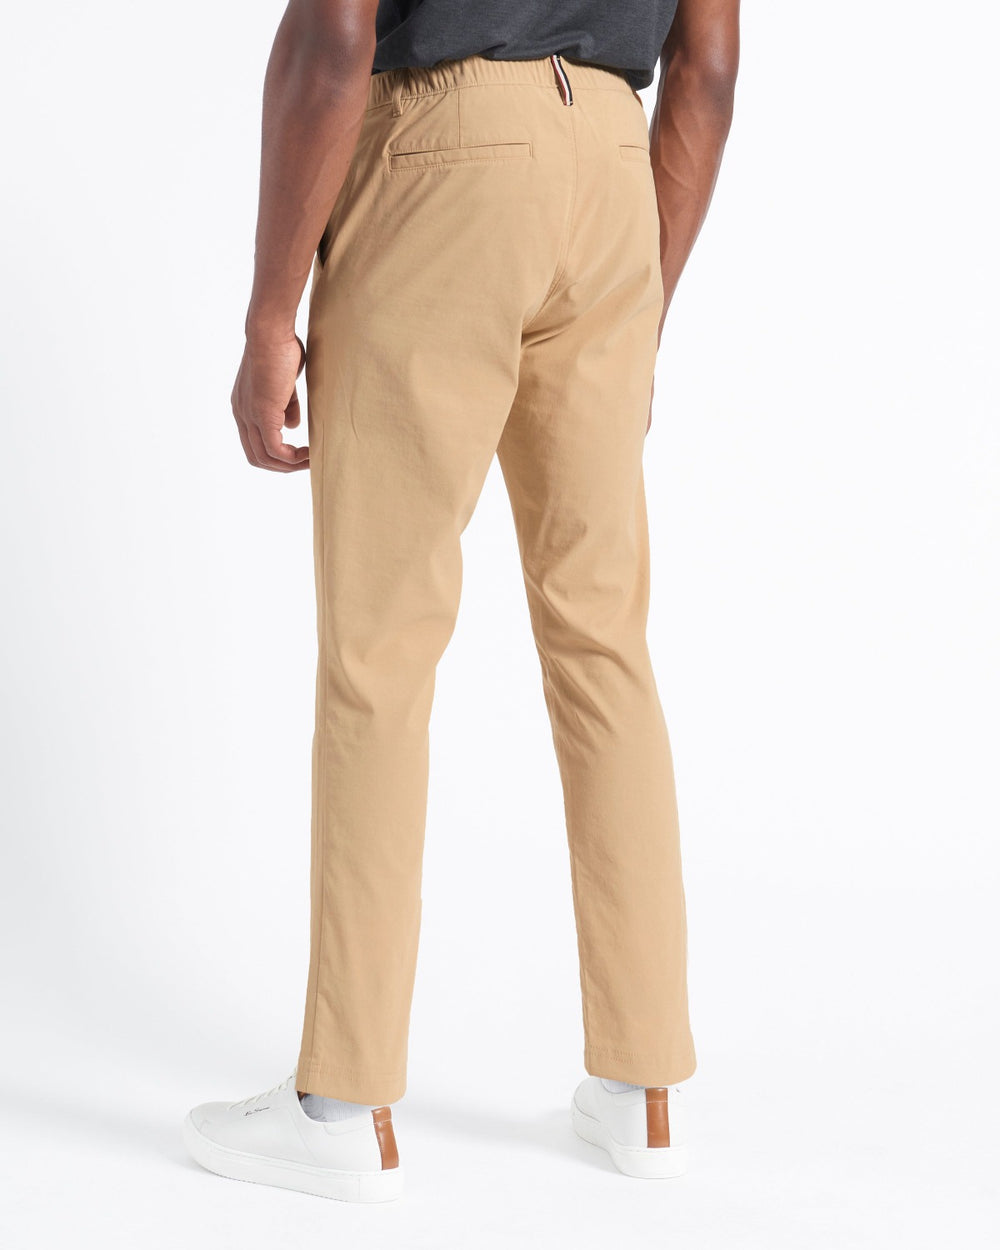 15 Best Men's Travel Pants of 2023, Tested by Style Editors